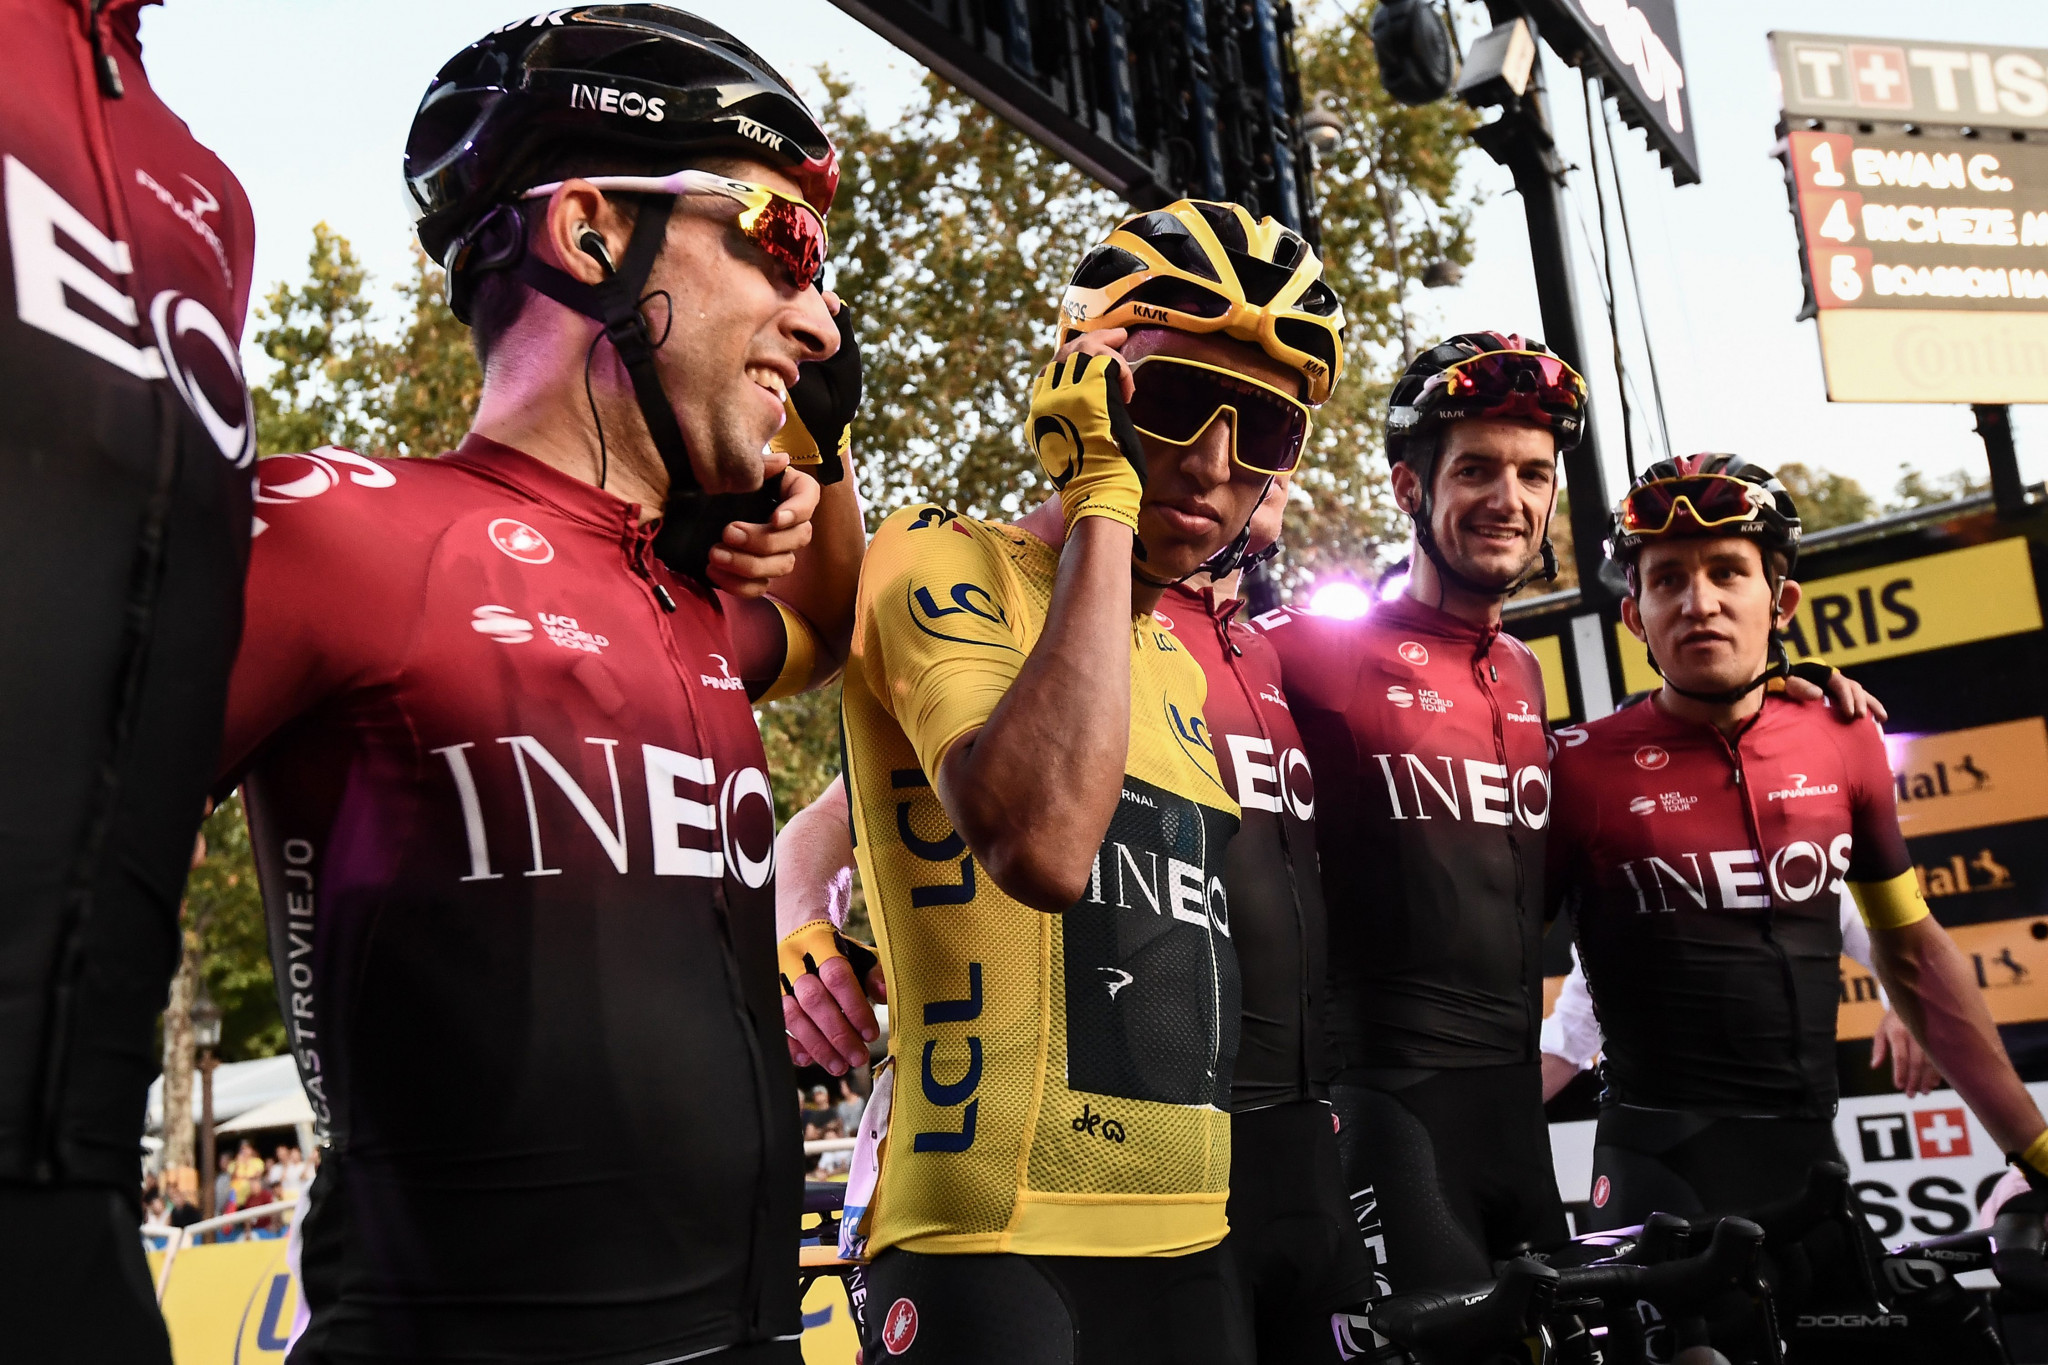 Team Ineos, formerly Team Sky, have won the Tour de France for the last five years ©Getty Images